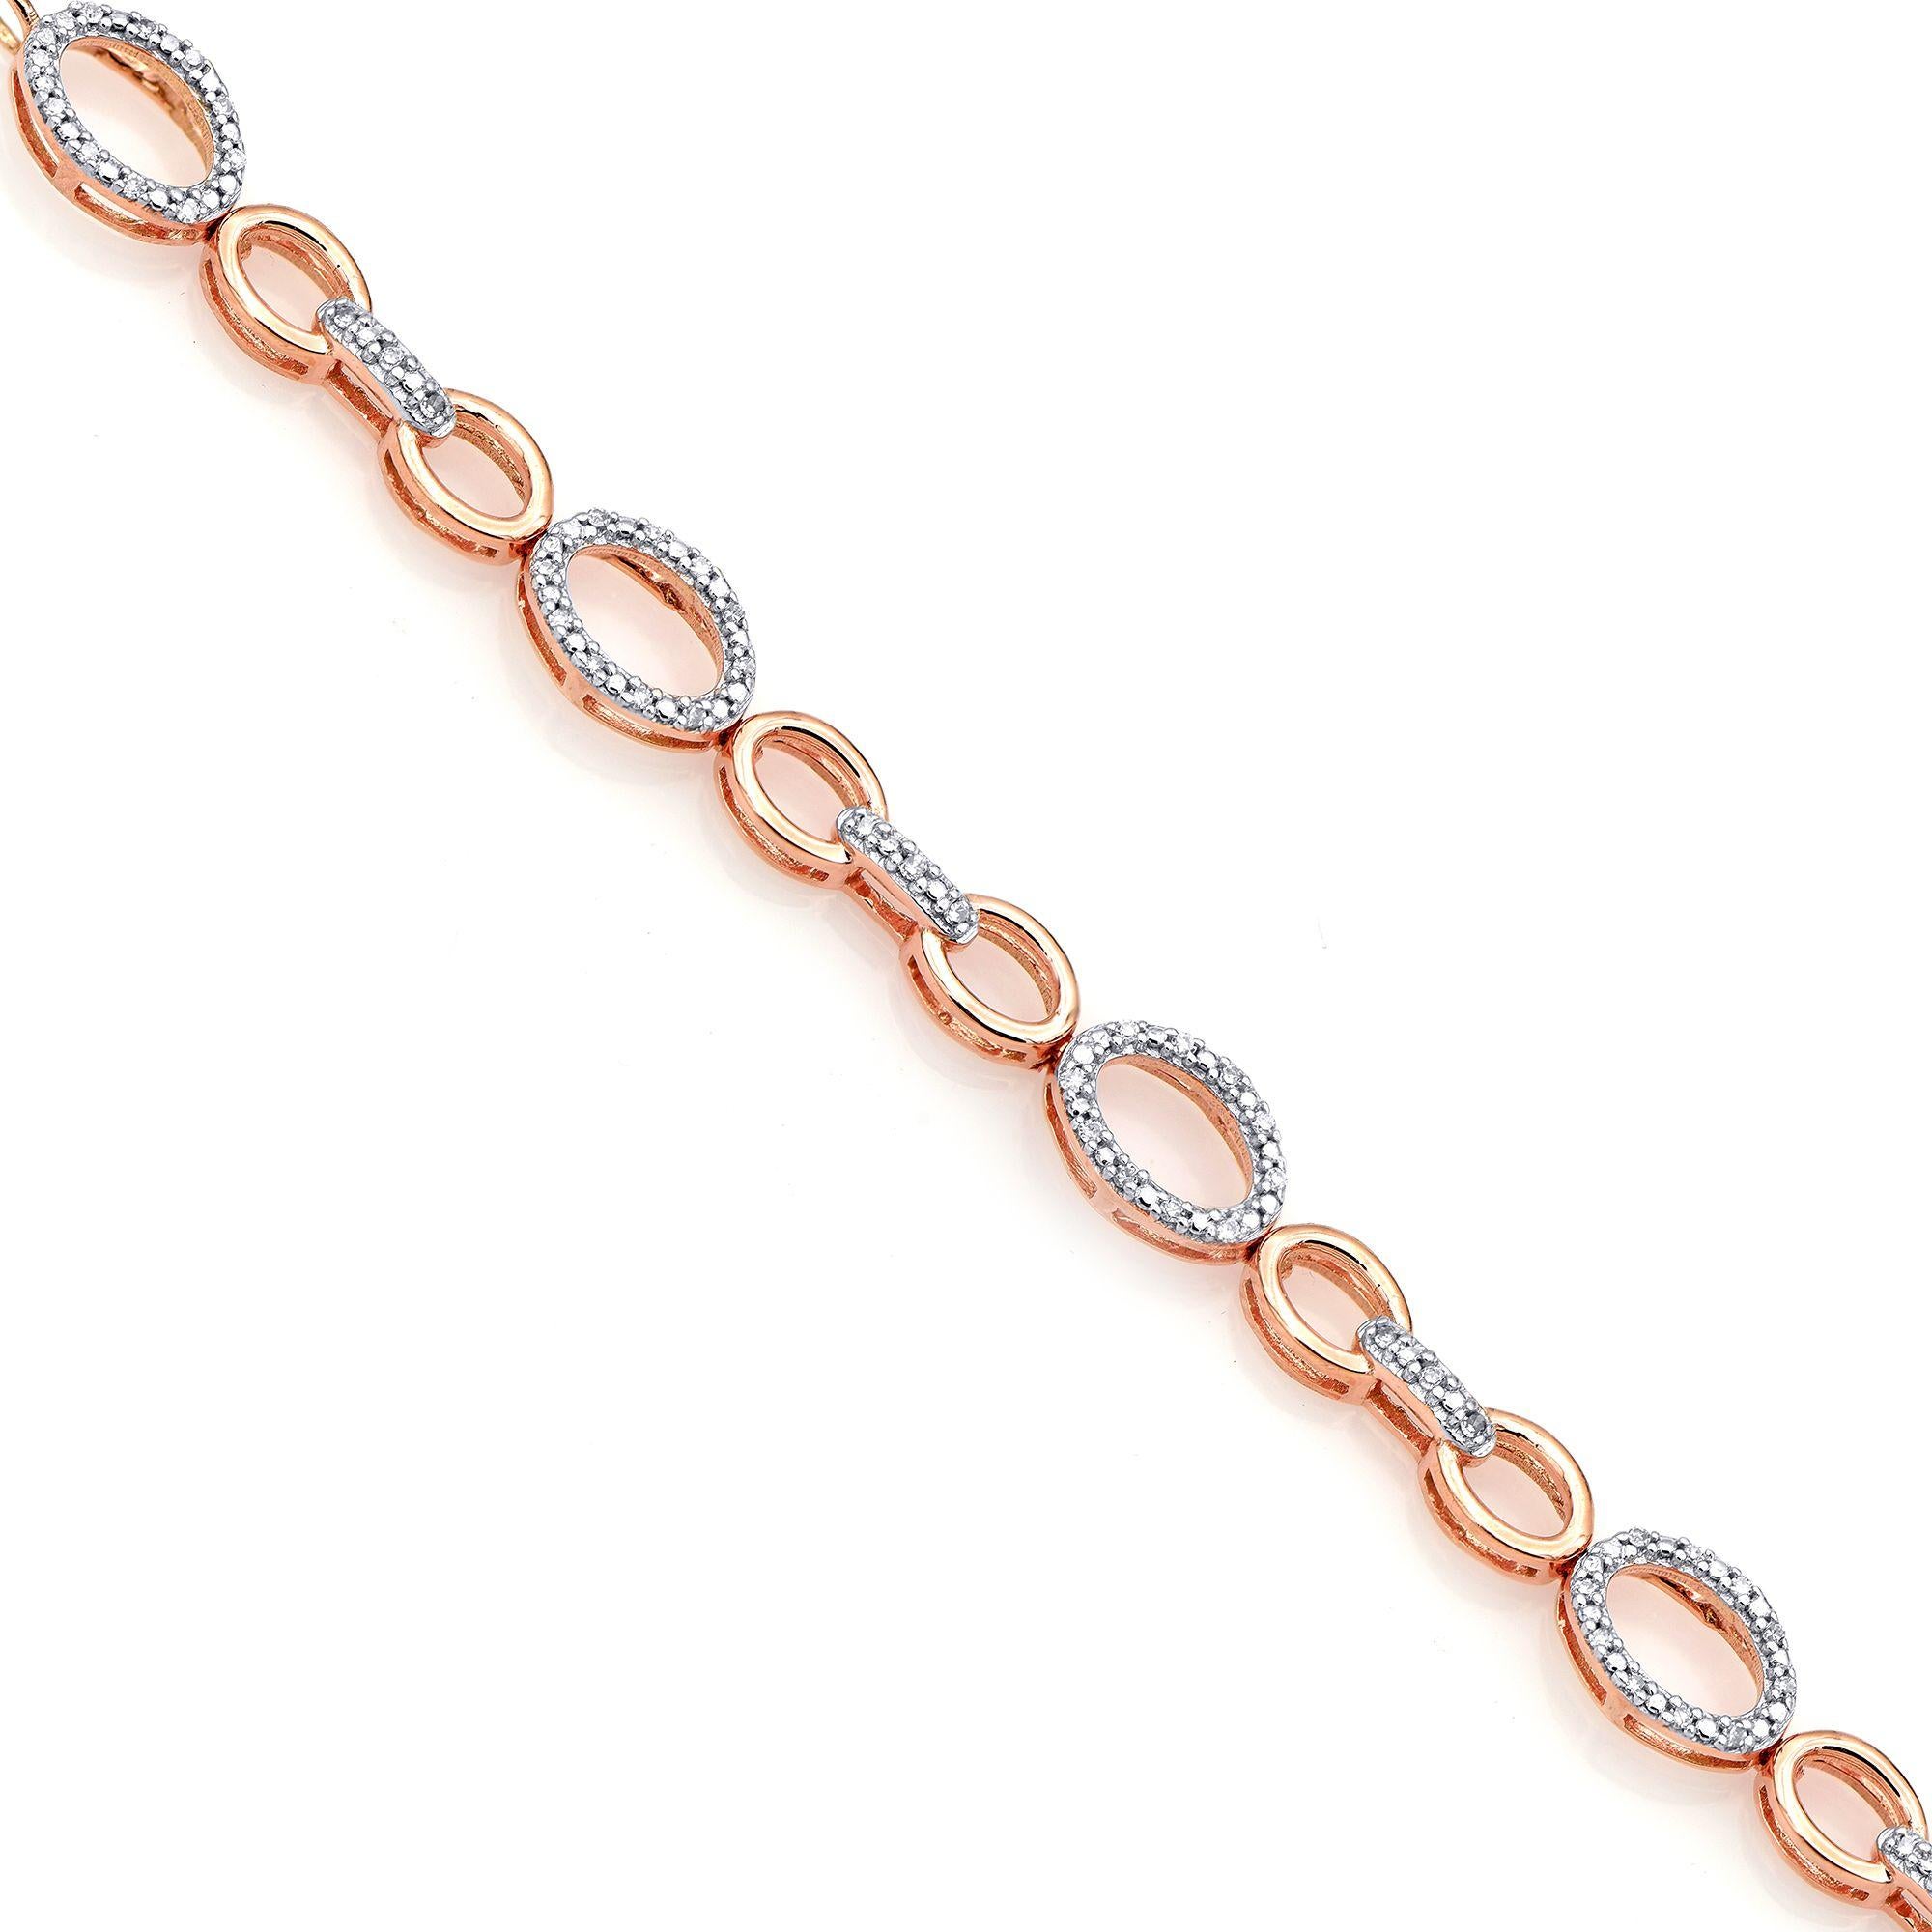 Elegantly designed diamond studded bracelet suitable for everyday wear studded with 104 diamonds in Prong Setting. The diamonds are graded I-J Color, I3 Clarity. Crafted beautifully in 10 Karat Rose Gold and secures comfortably with lobster lock. 
